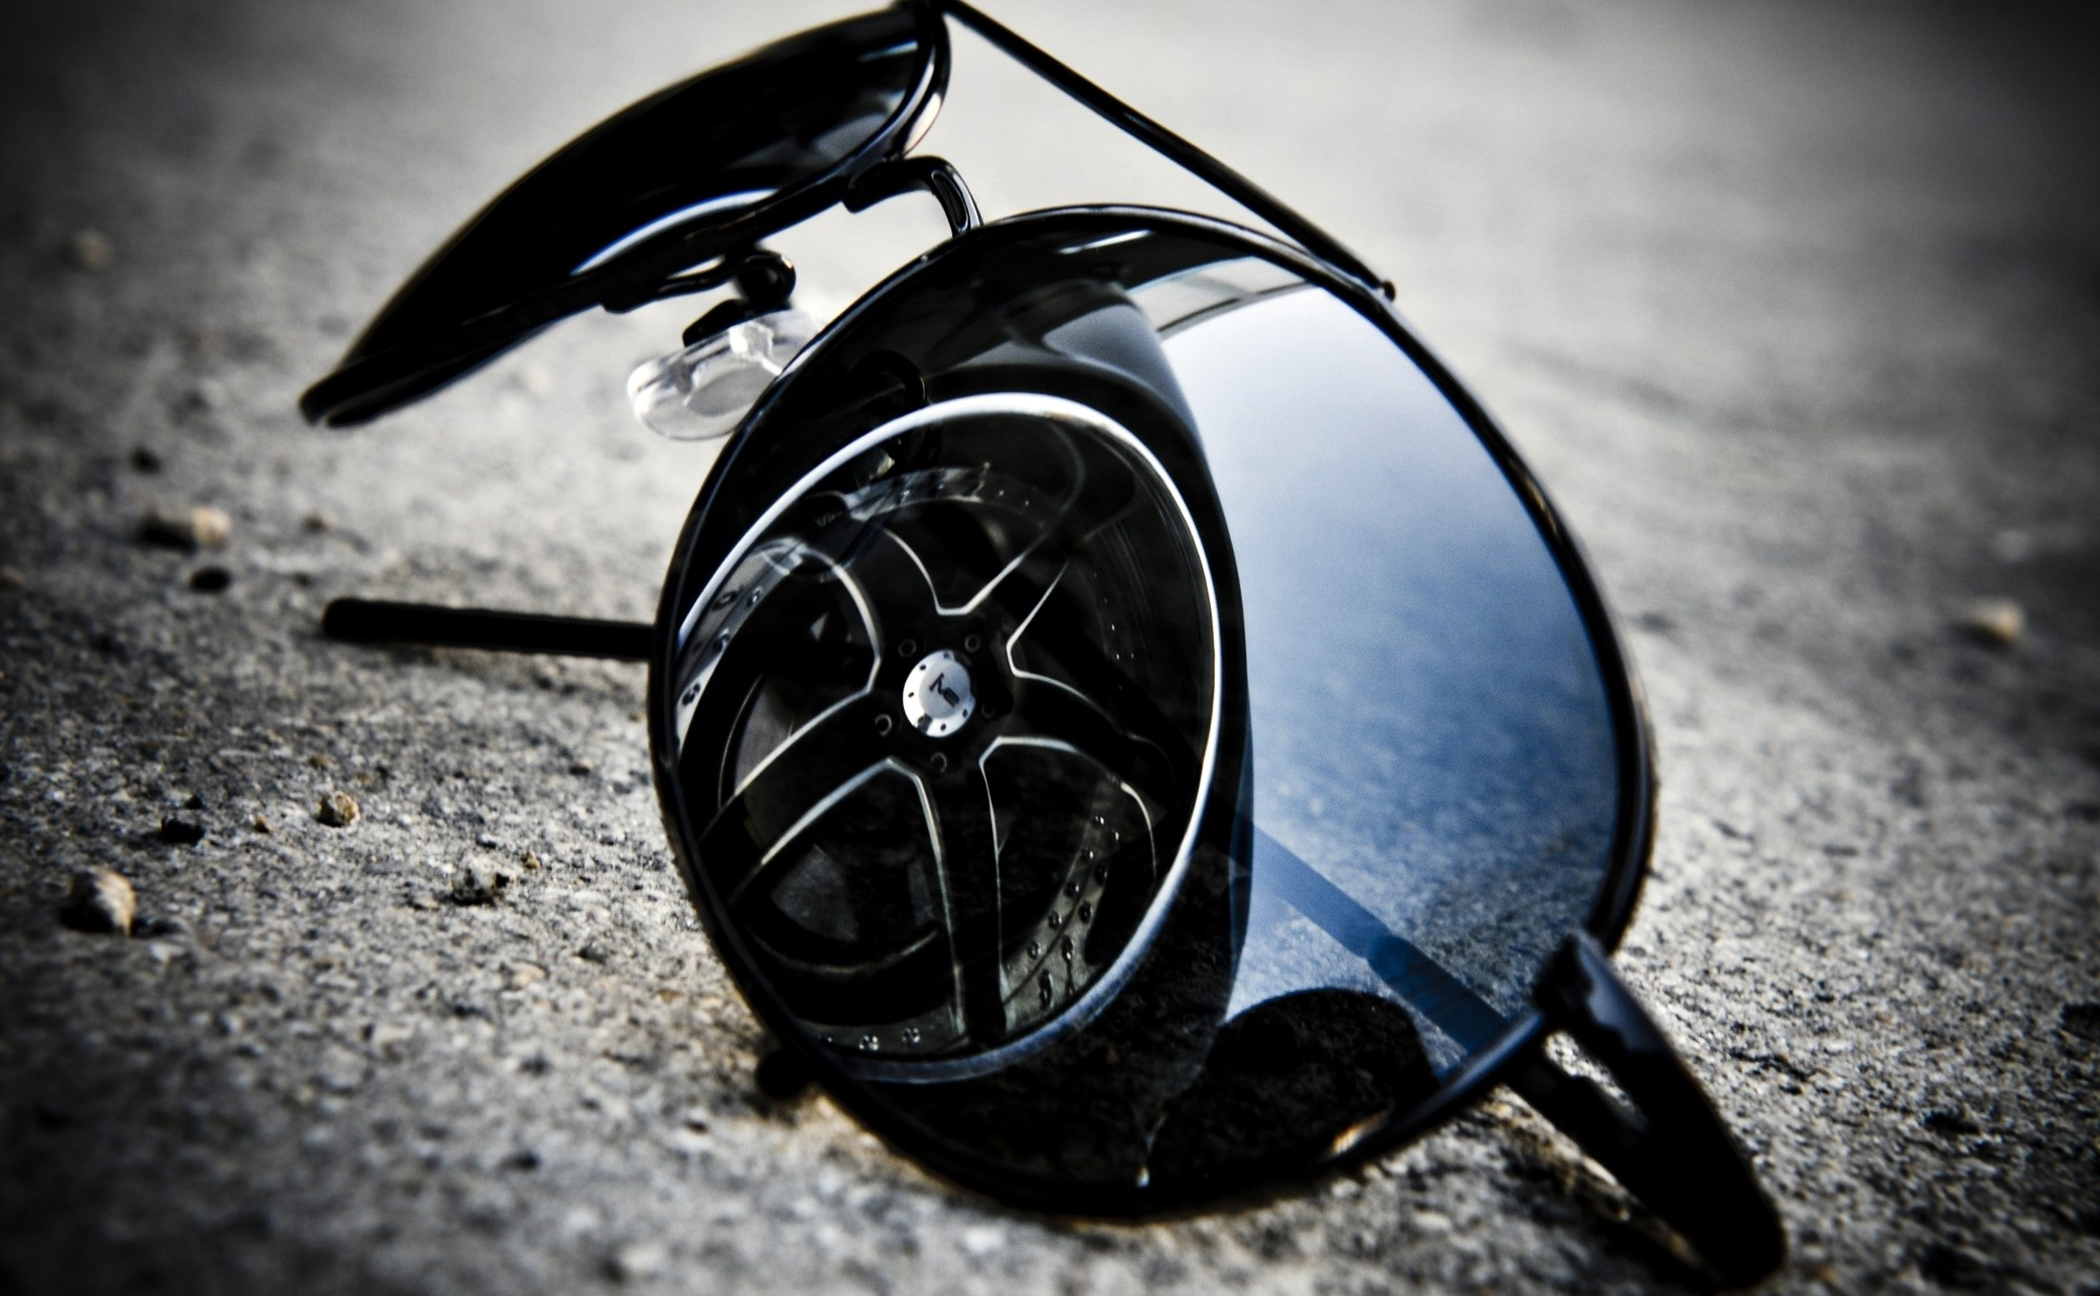 Sunglasses Reflection And Car Tire Wallpaper